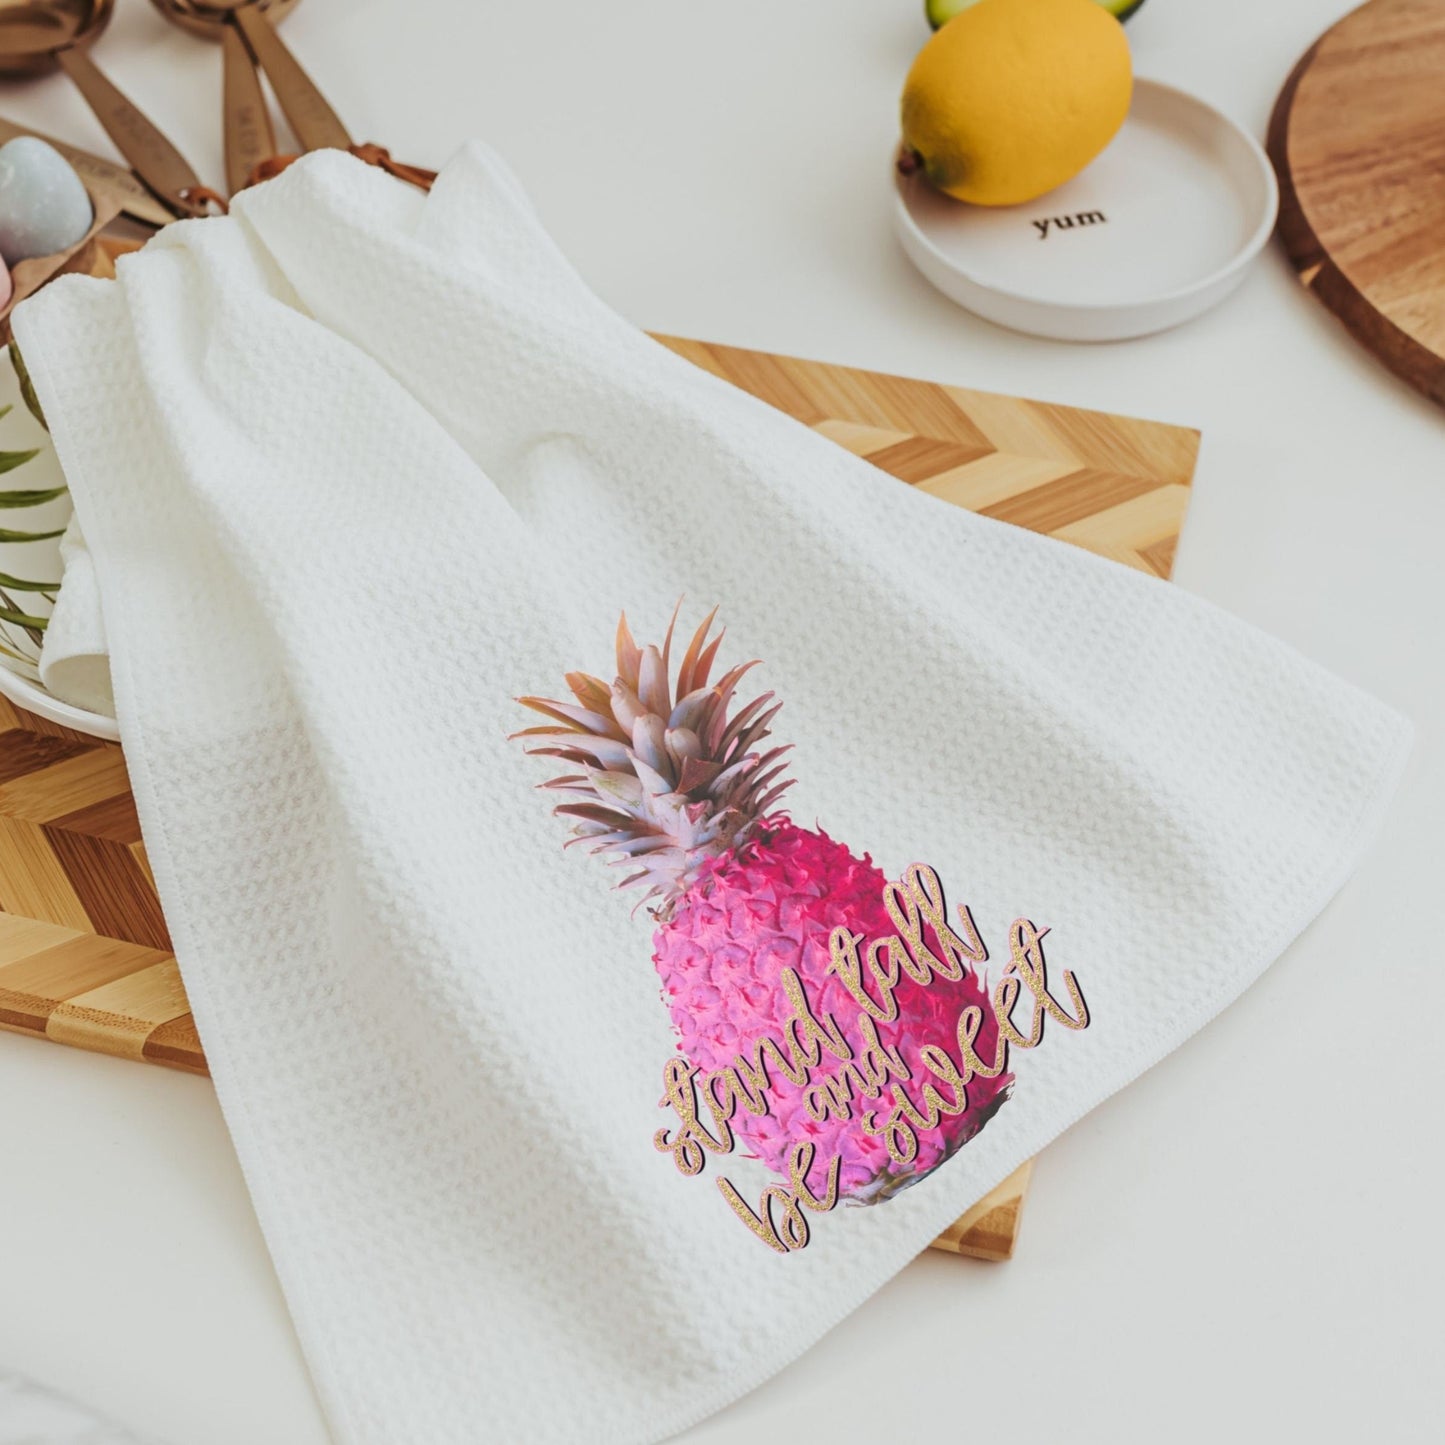 Stand tall and be sweet pineapple towel